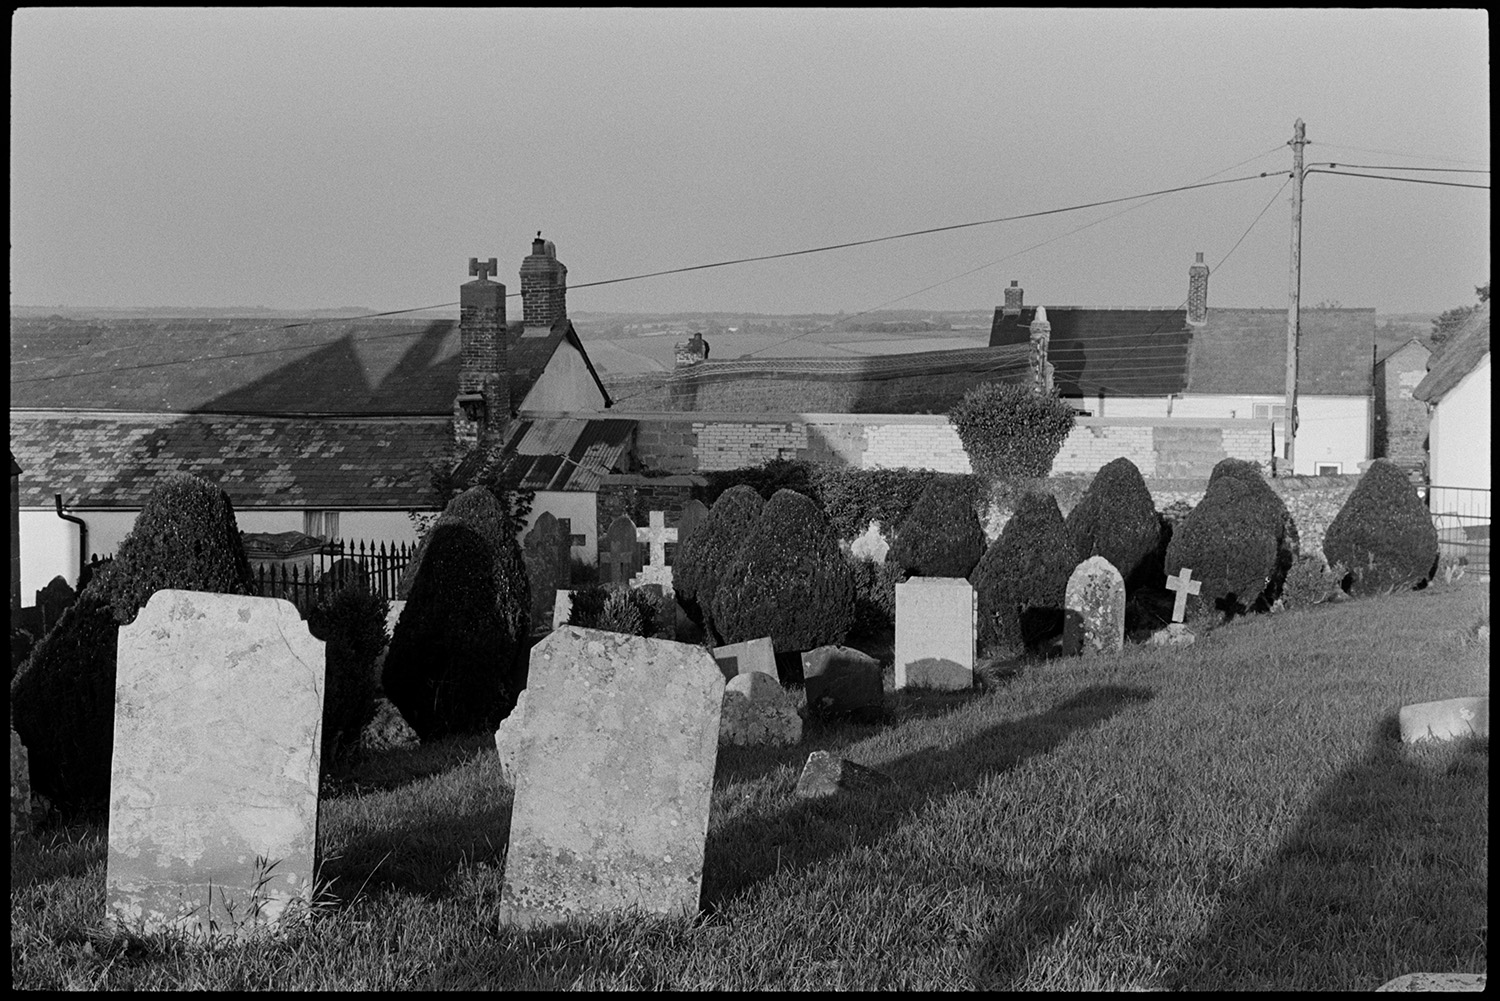 Men working in graveyard, carrying flowers, clipping hedge.
[Petrockstowe churchyard with gravestones and clipped yew bushes. Long shadows are stretching across the churchyard and village houses can be seen in the background.]